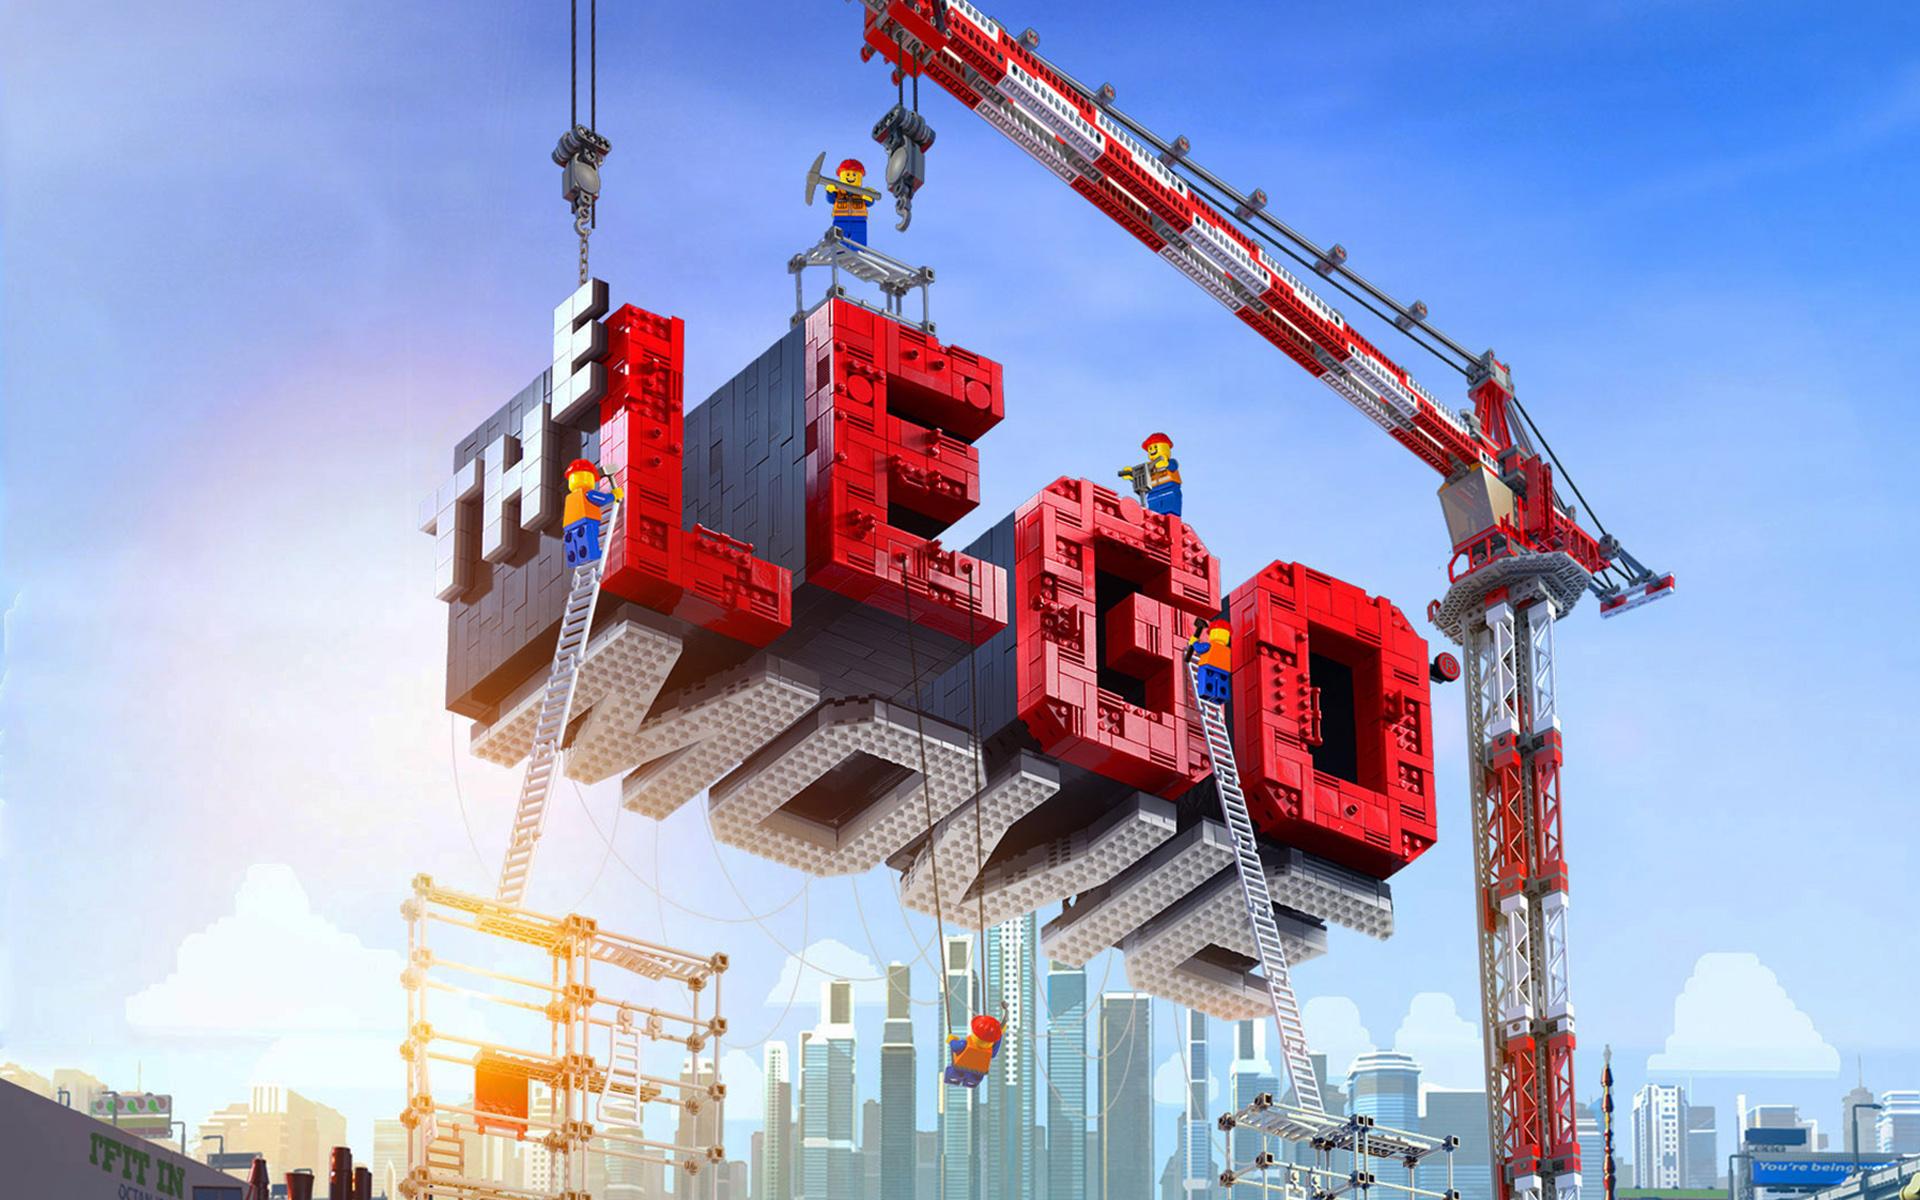 The LEGO Movie 2 Has a Release Date! AWESOME!